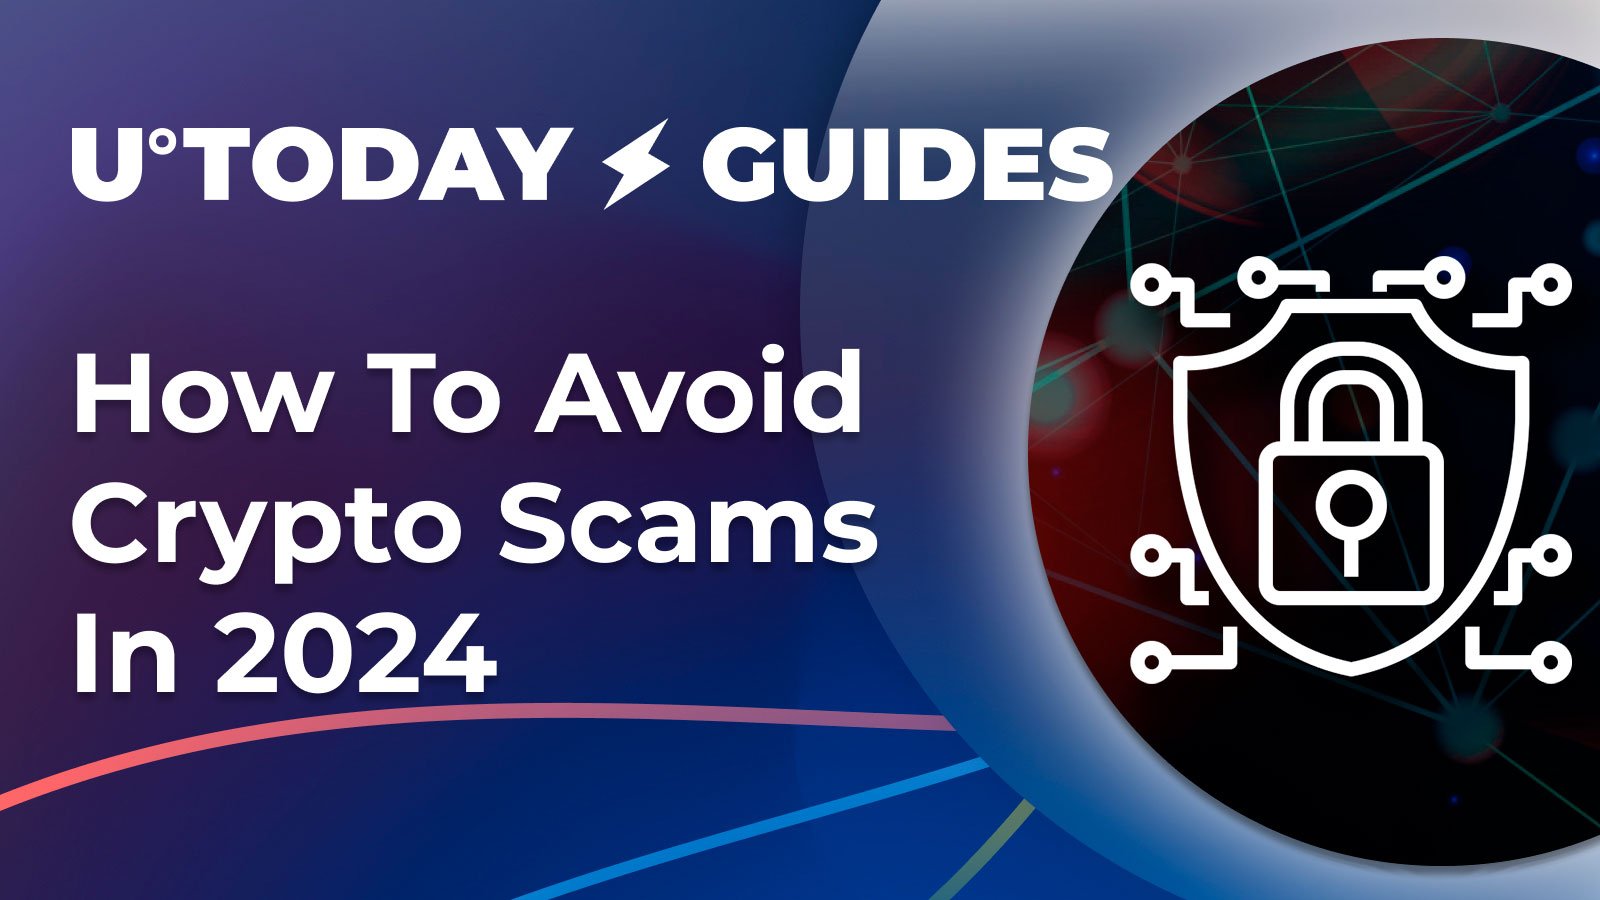 How to Avoid Crypto Scams in 2024